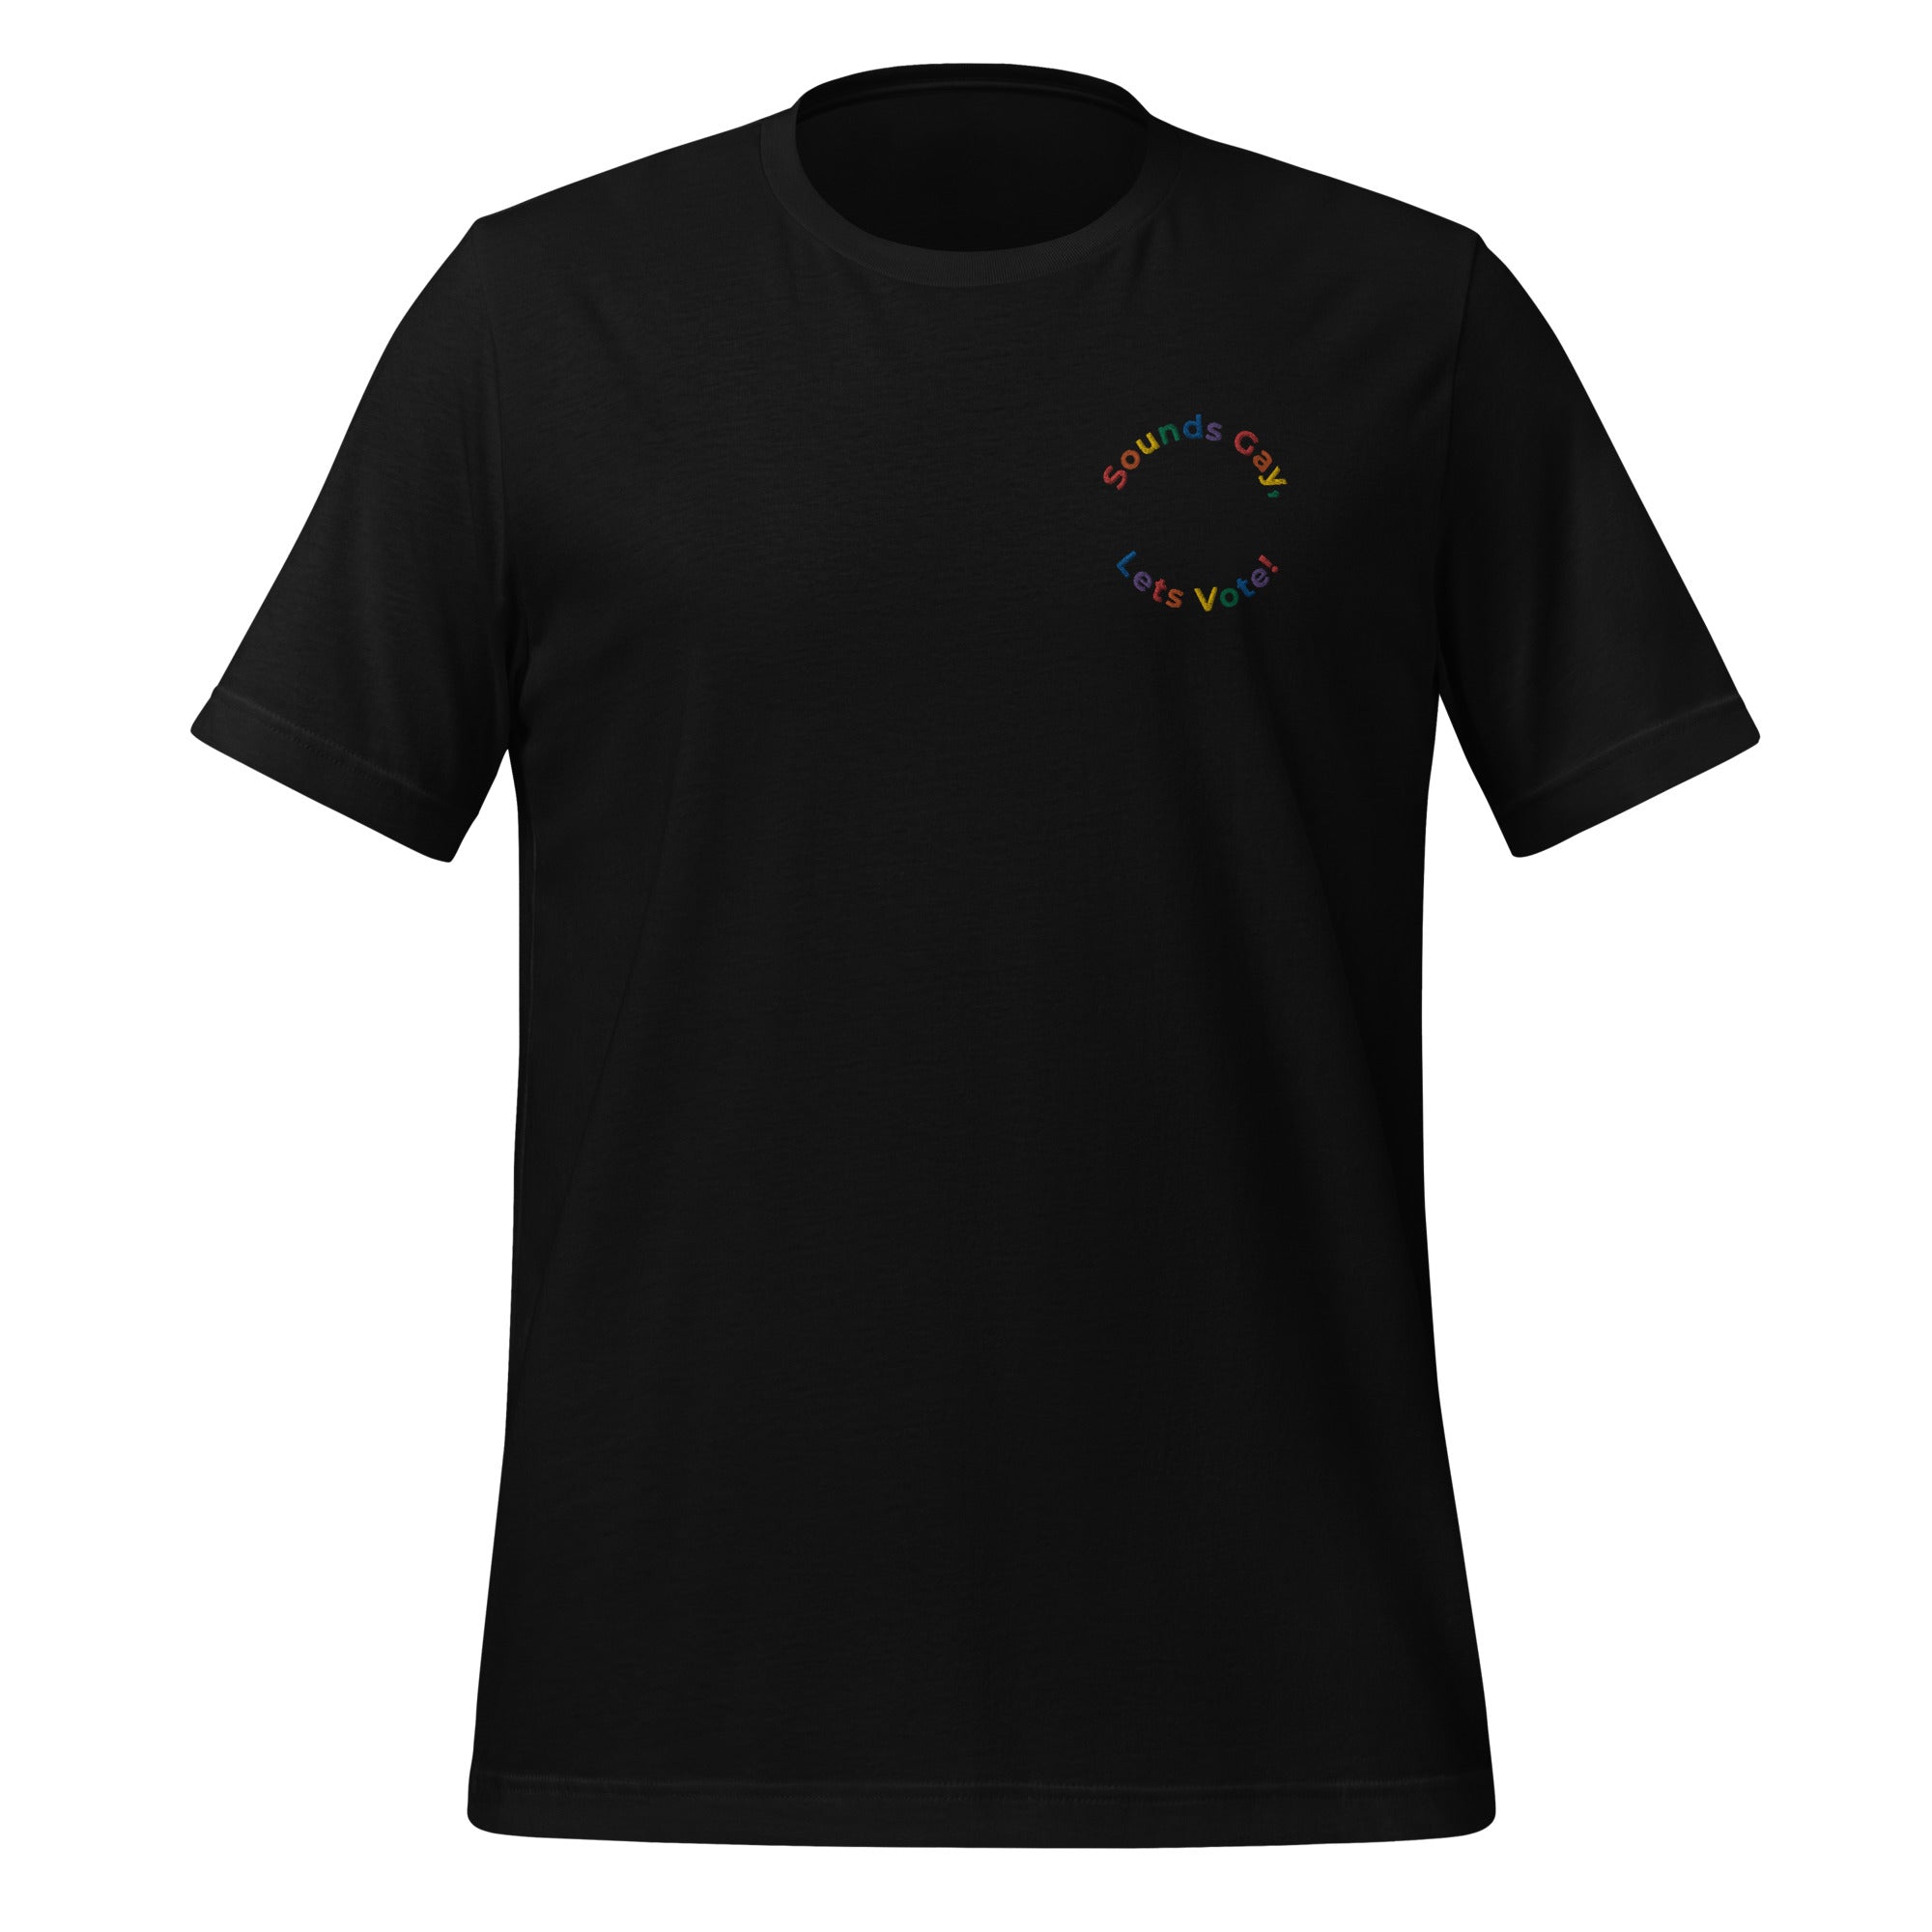 Sounds Gay, Let's Vote Embroidered Unisex T-Shirt